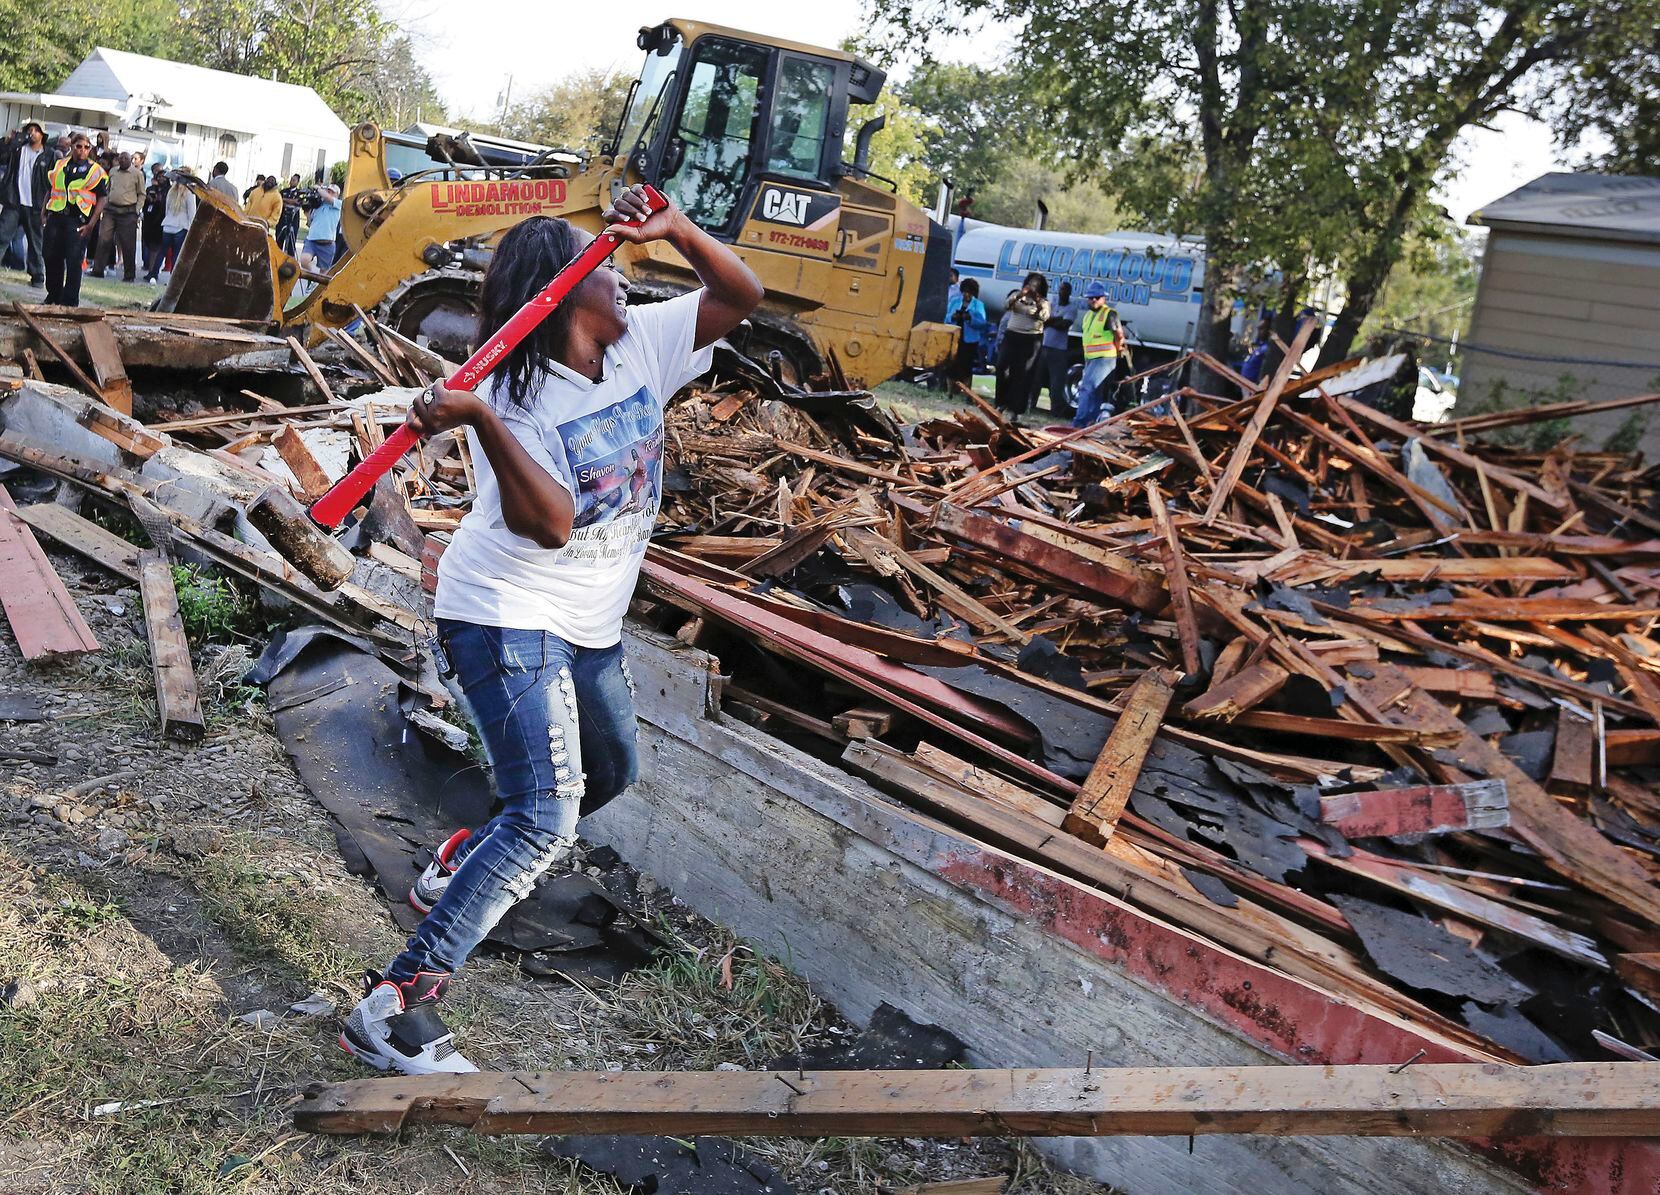 Cynthia King, Shavon Randle's great-aunt, puts the finishing whacks on "this godforsaken house" where the girl's body was found. Relatives and neighbors gathered for the demolition of the run-down structure on Kiest Boulevard in October.